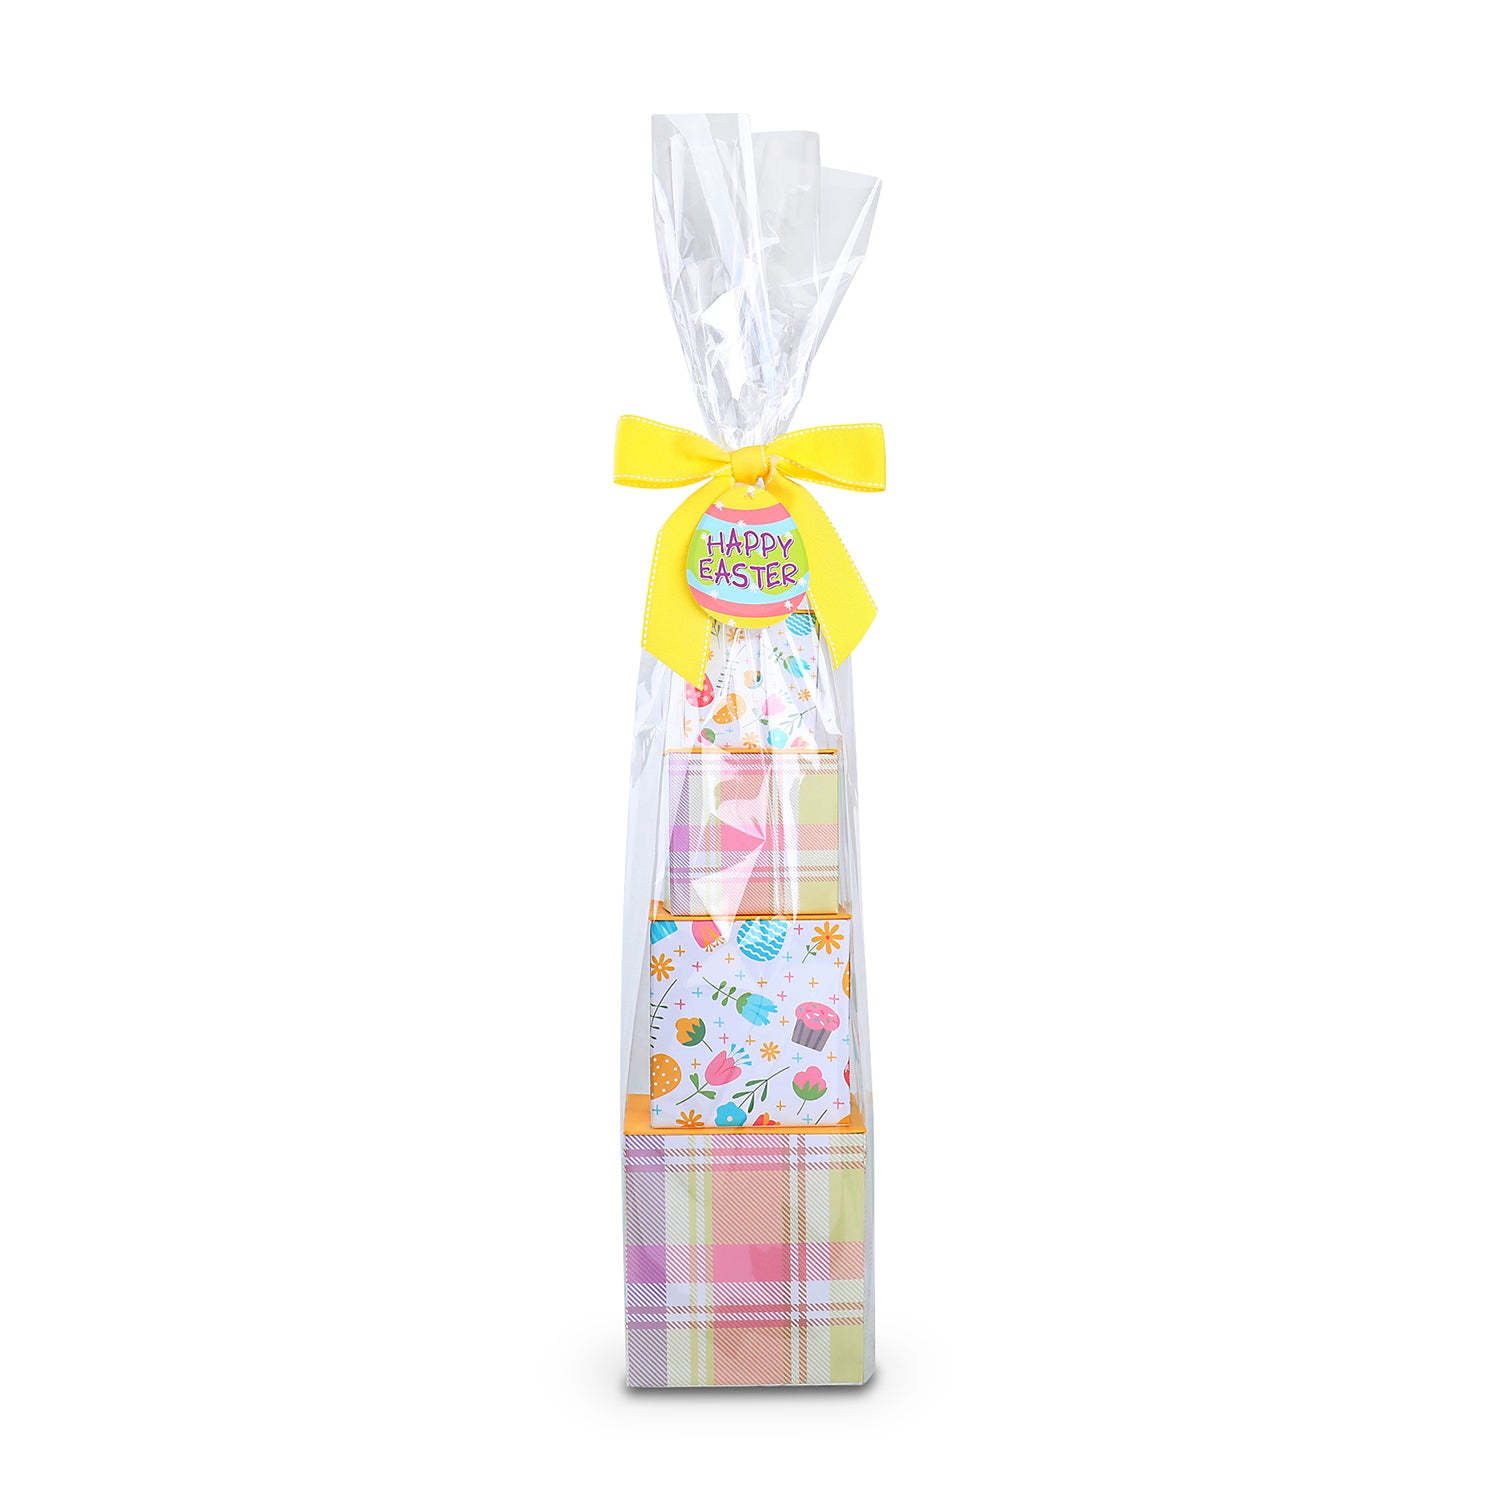 Easter Tower stacked, wrapped, with yelllow ribbon and Happy Easter Hang Tag